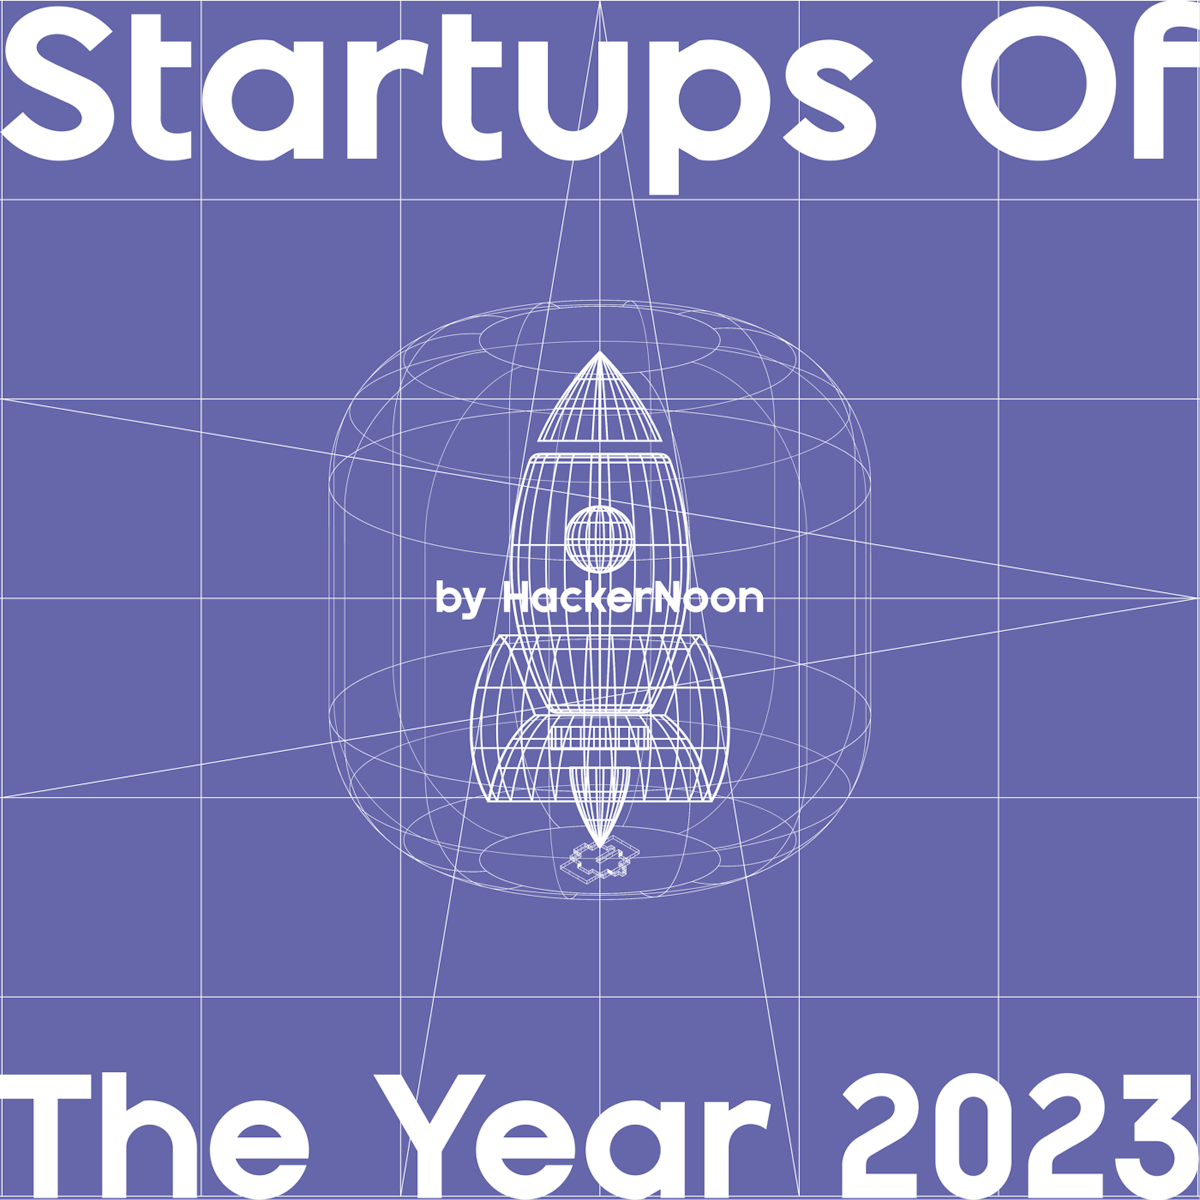 featured image - Startups of the Year 2023: Blockchain Startup Interview